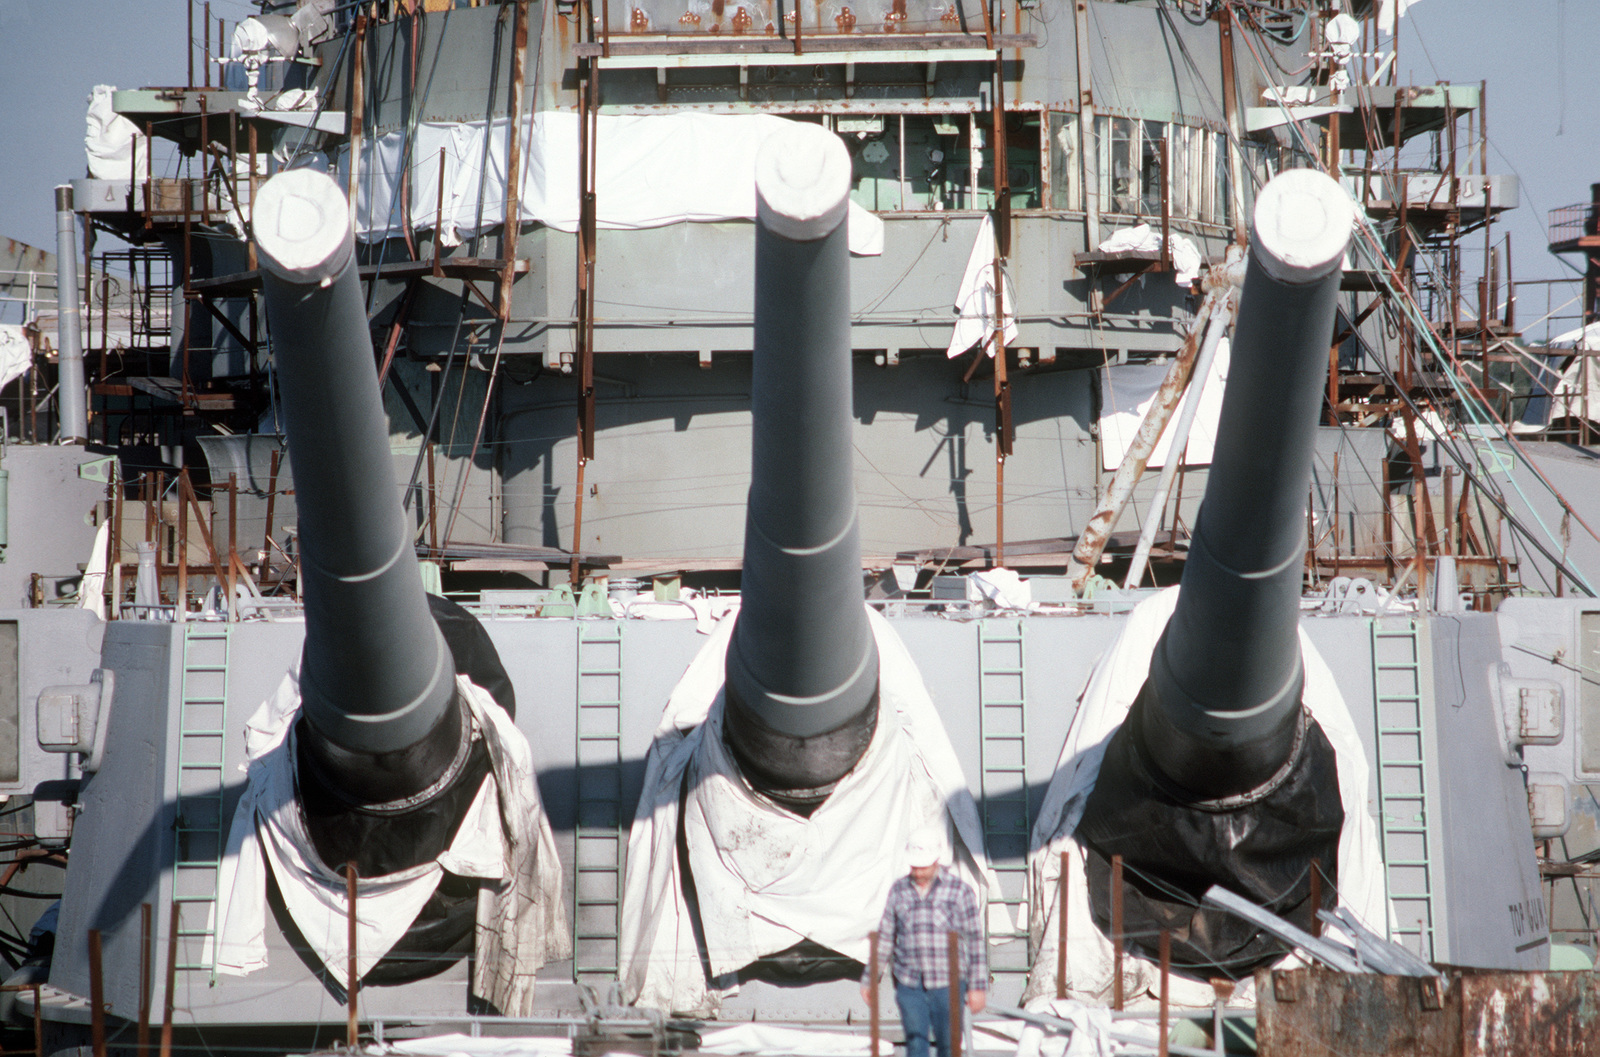 A view of the No. 2 Mark 7 16inch/50caliber gun turret aboard the